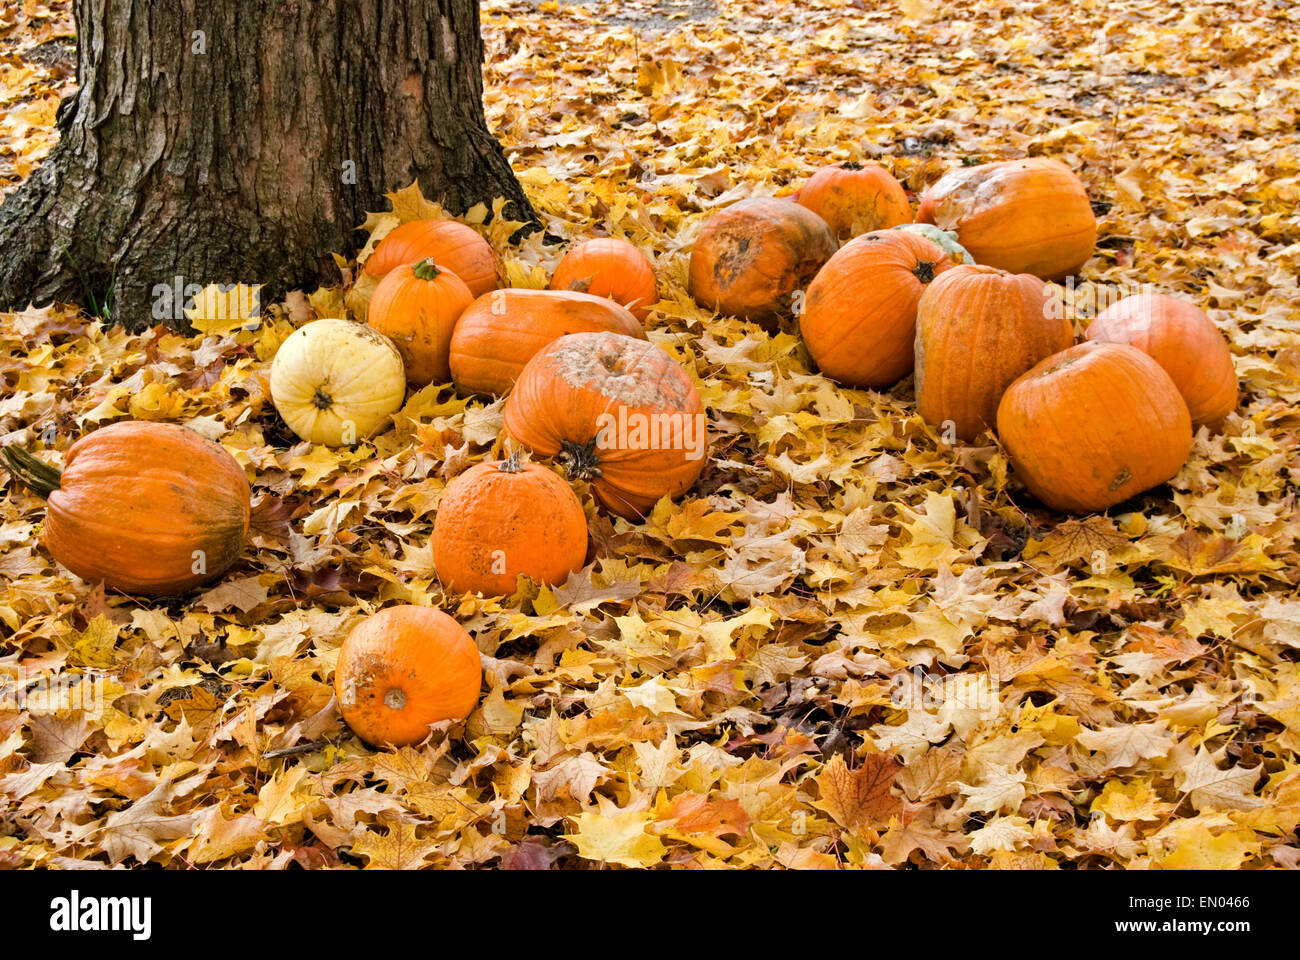 Rotting autumn pumpkins in dried leaves under tree. Stock Photo